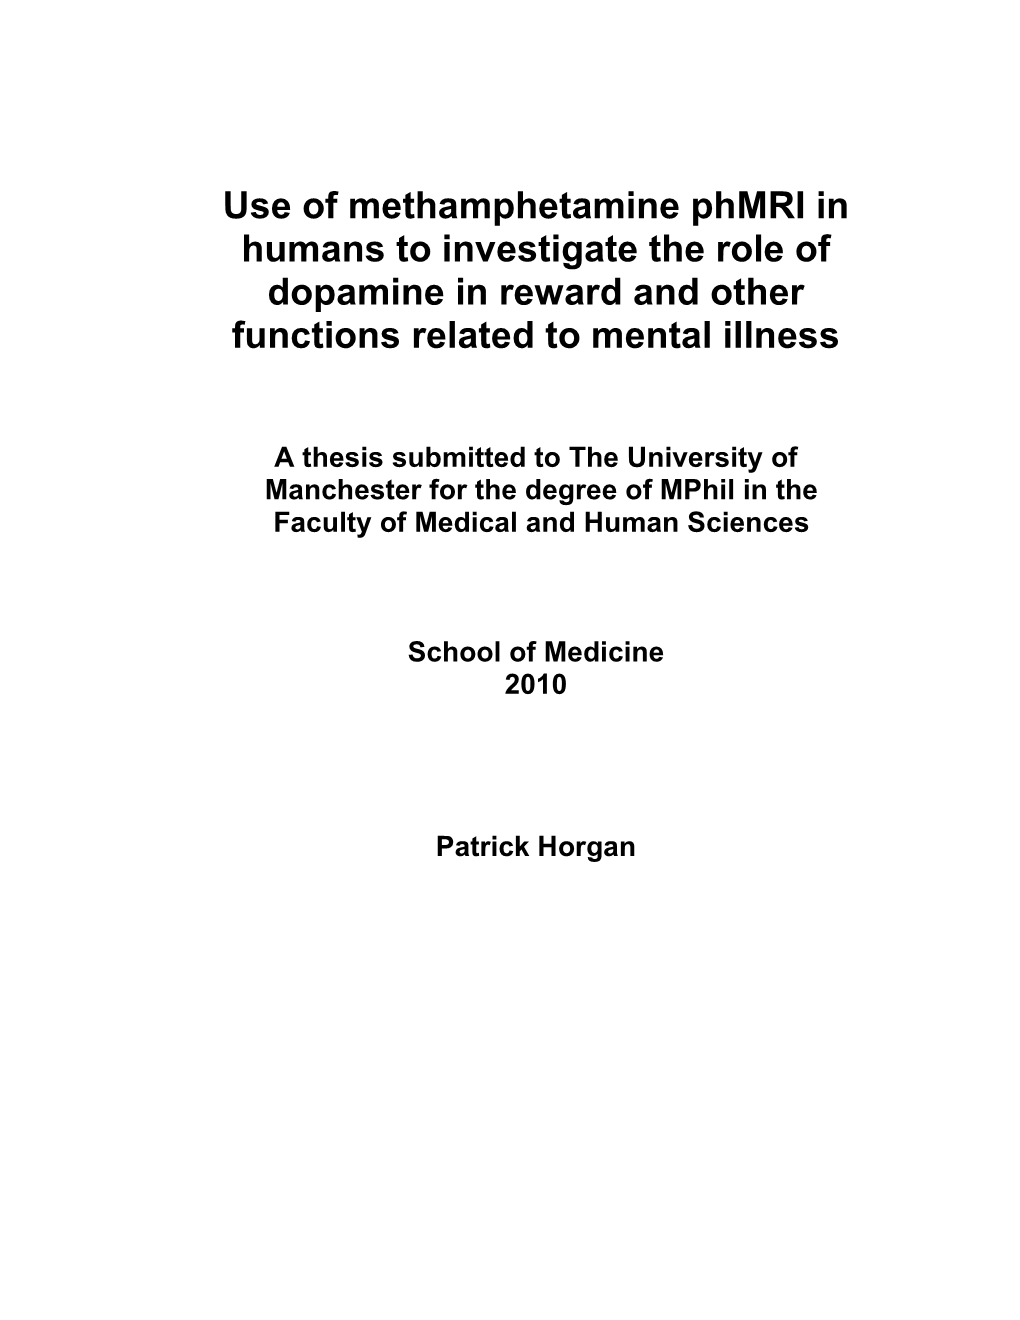 Use of Methamphetamine Phmri in Humans to Investigate the Role of Dopamine in Reward and Other Functions Related to Mental Illness”